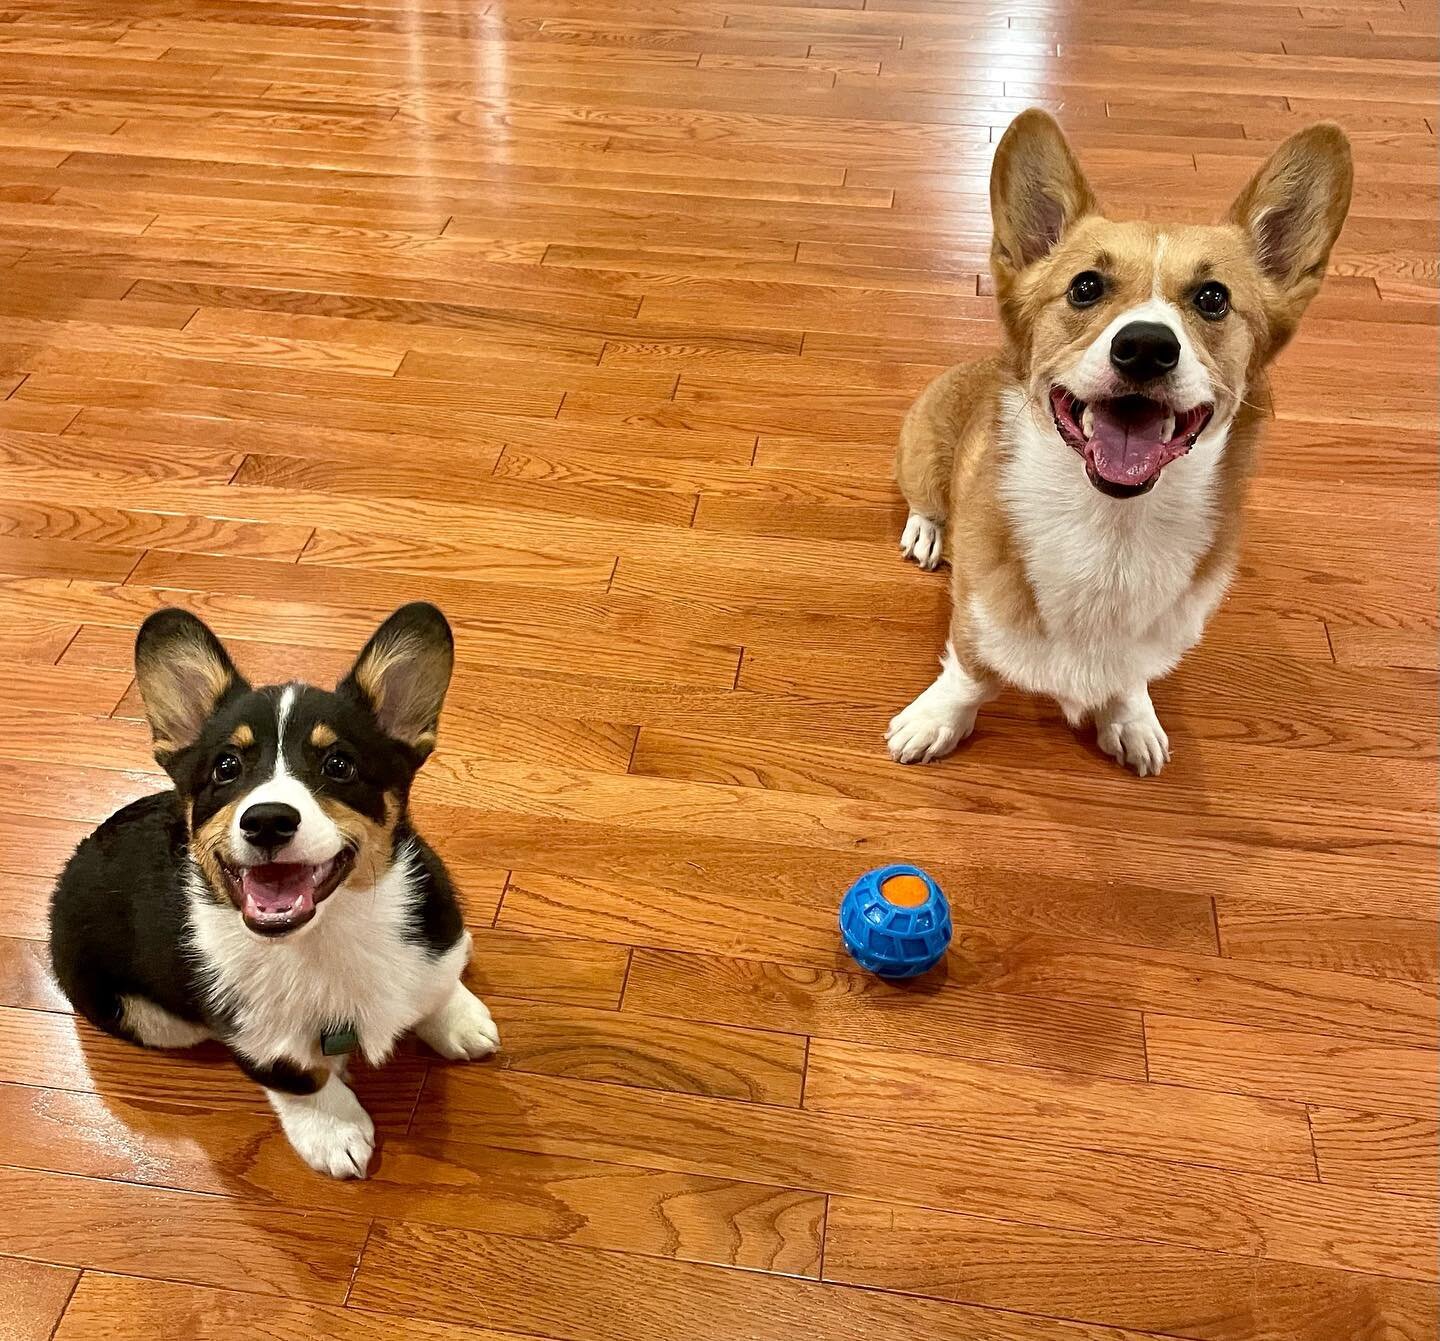 The corgi meeting you&rsquo;ve all been waiting for finally happened last night!! Our OG bestie Kevin met Biff and seemed to tolerate him 😅 Kev&rsquo;s used to ALL the attention, so we think it&rsquo;ll take some more socializing sessions but luckil